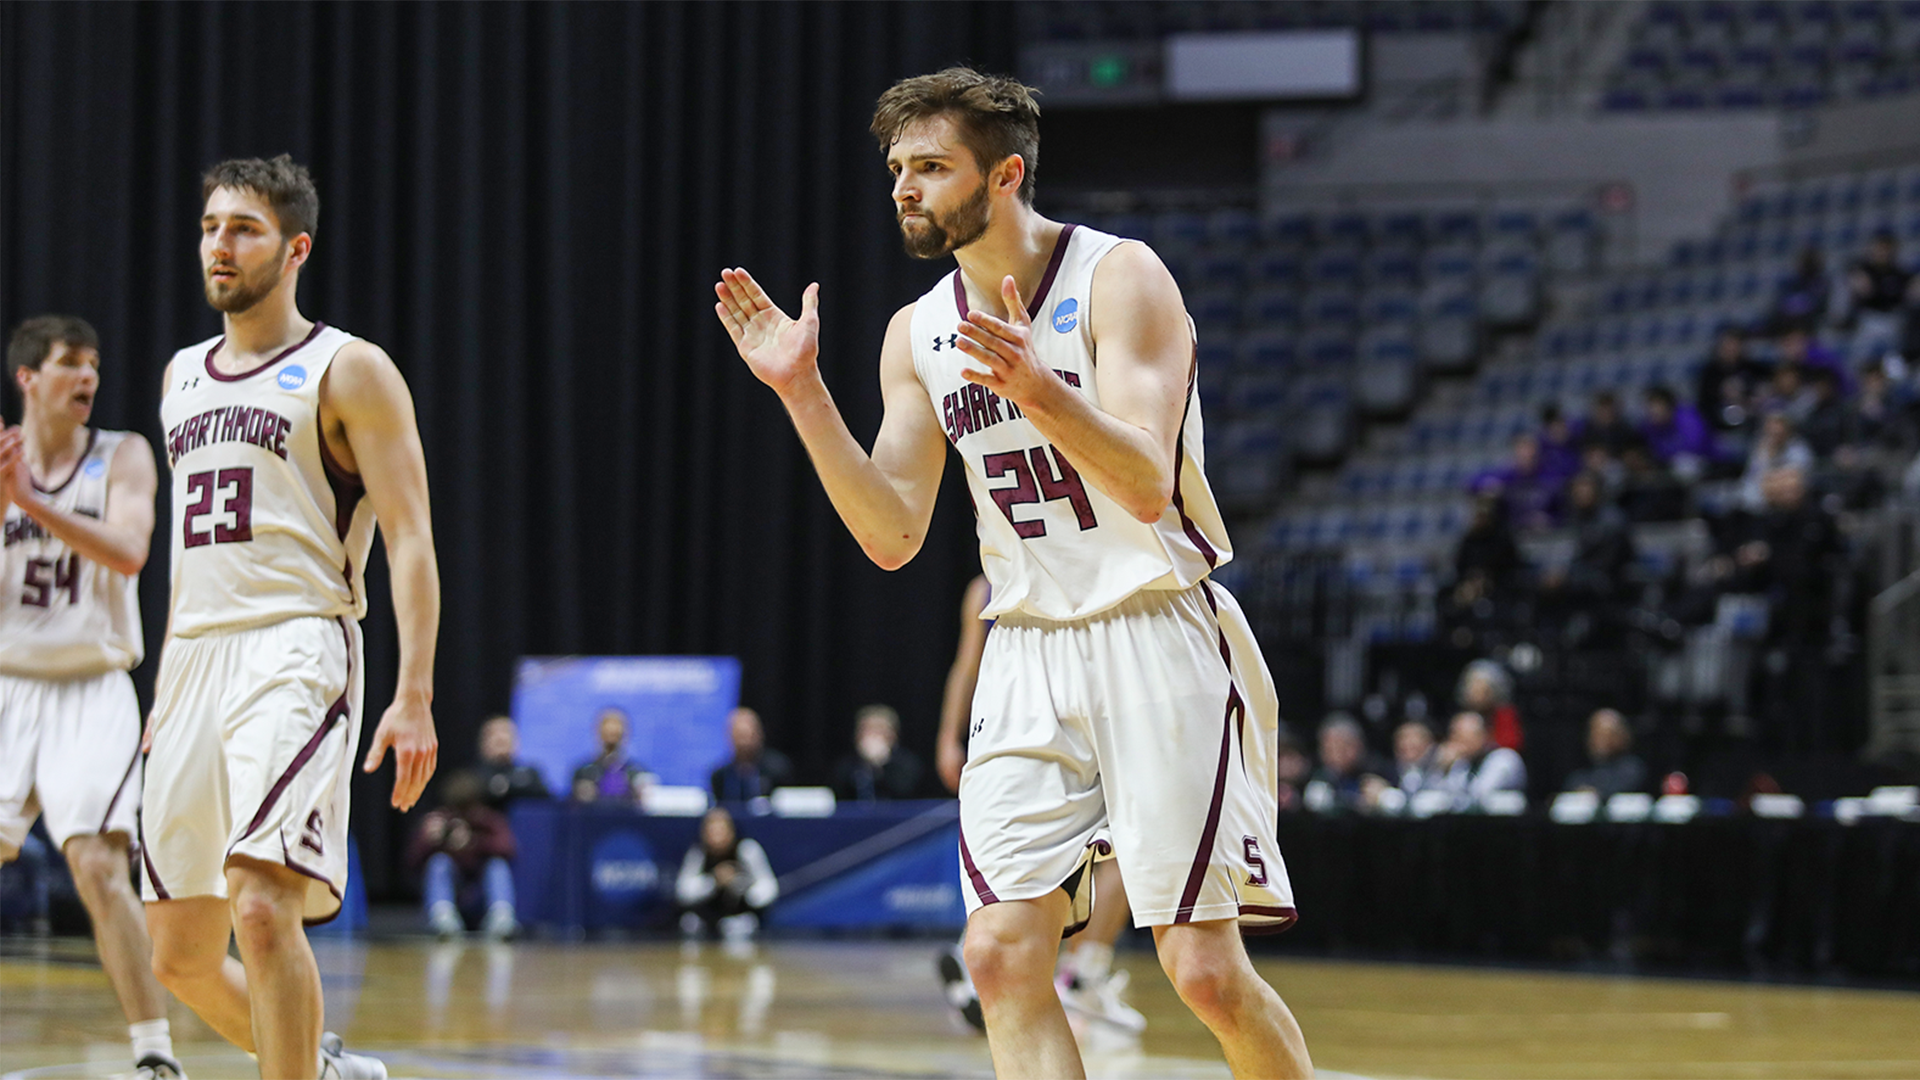 Garnet Outlasted by Christopher Newport in Final Four